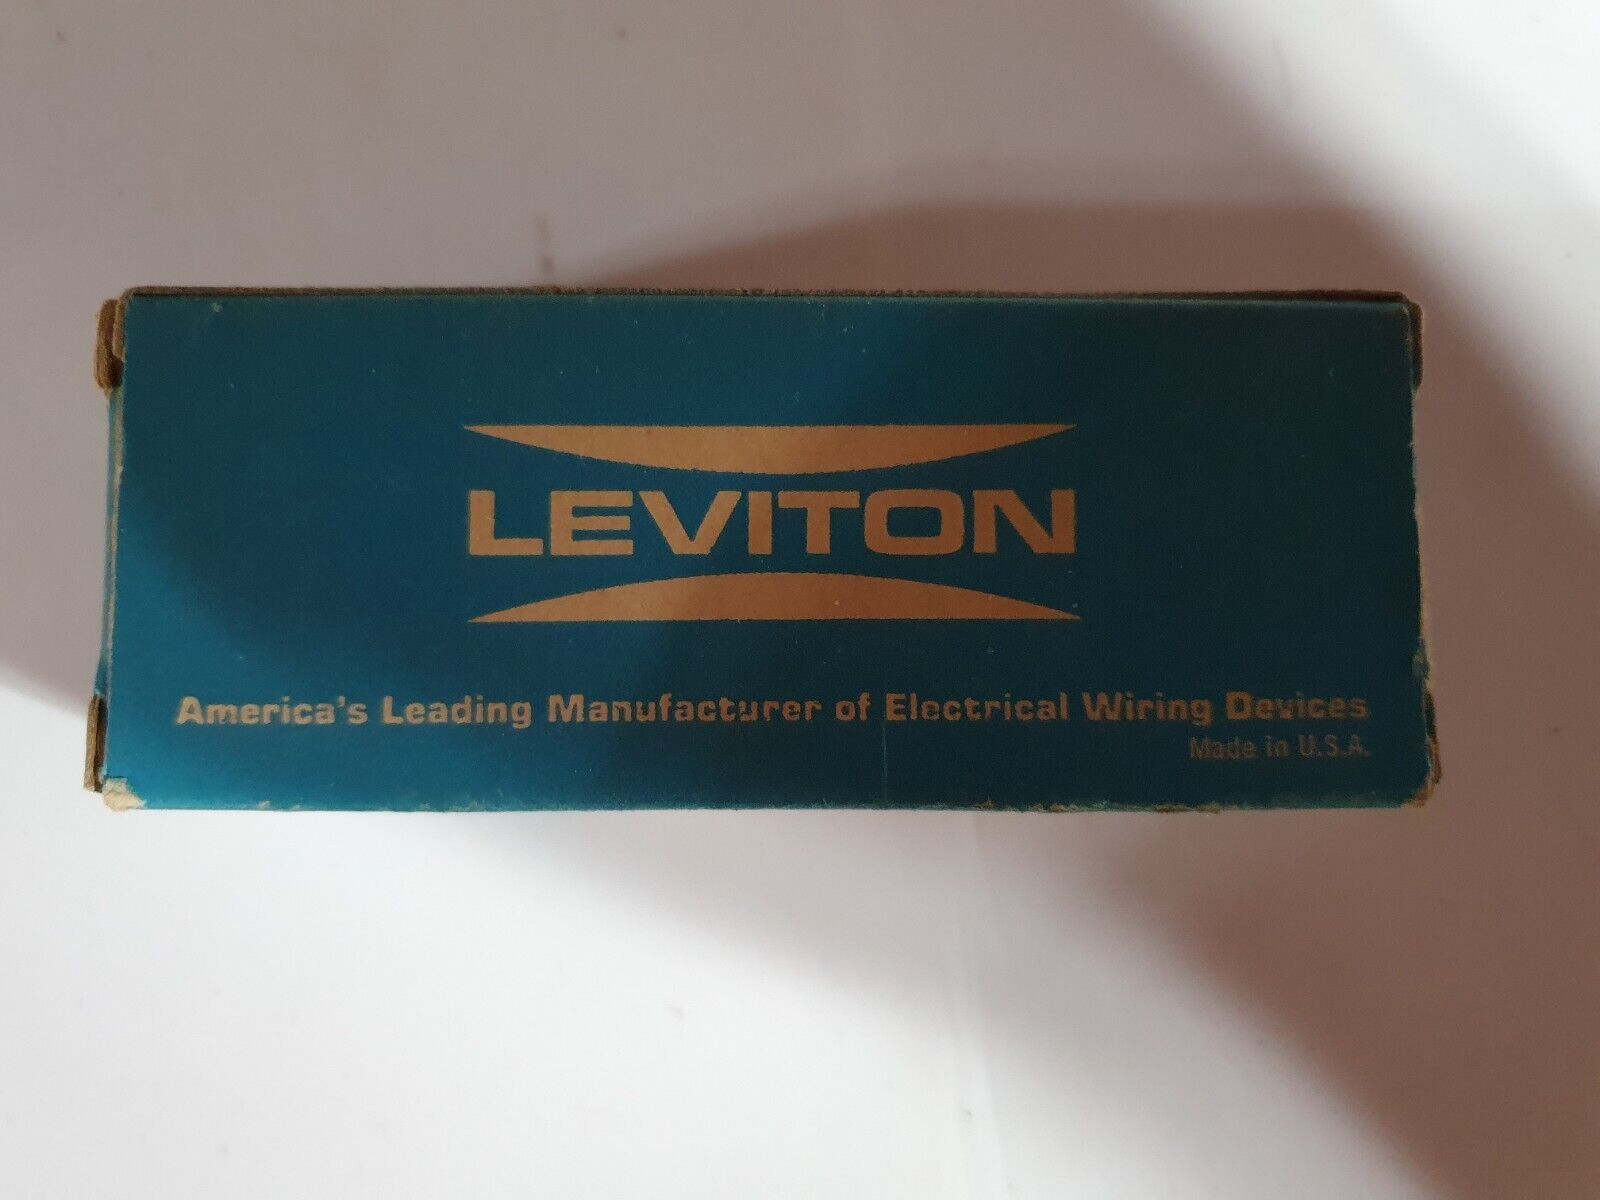 Leviton Vintage Wall Outlet Collectible